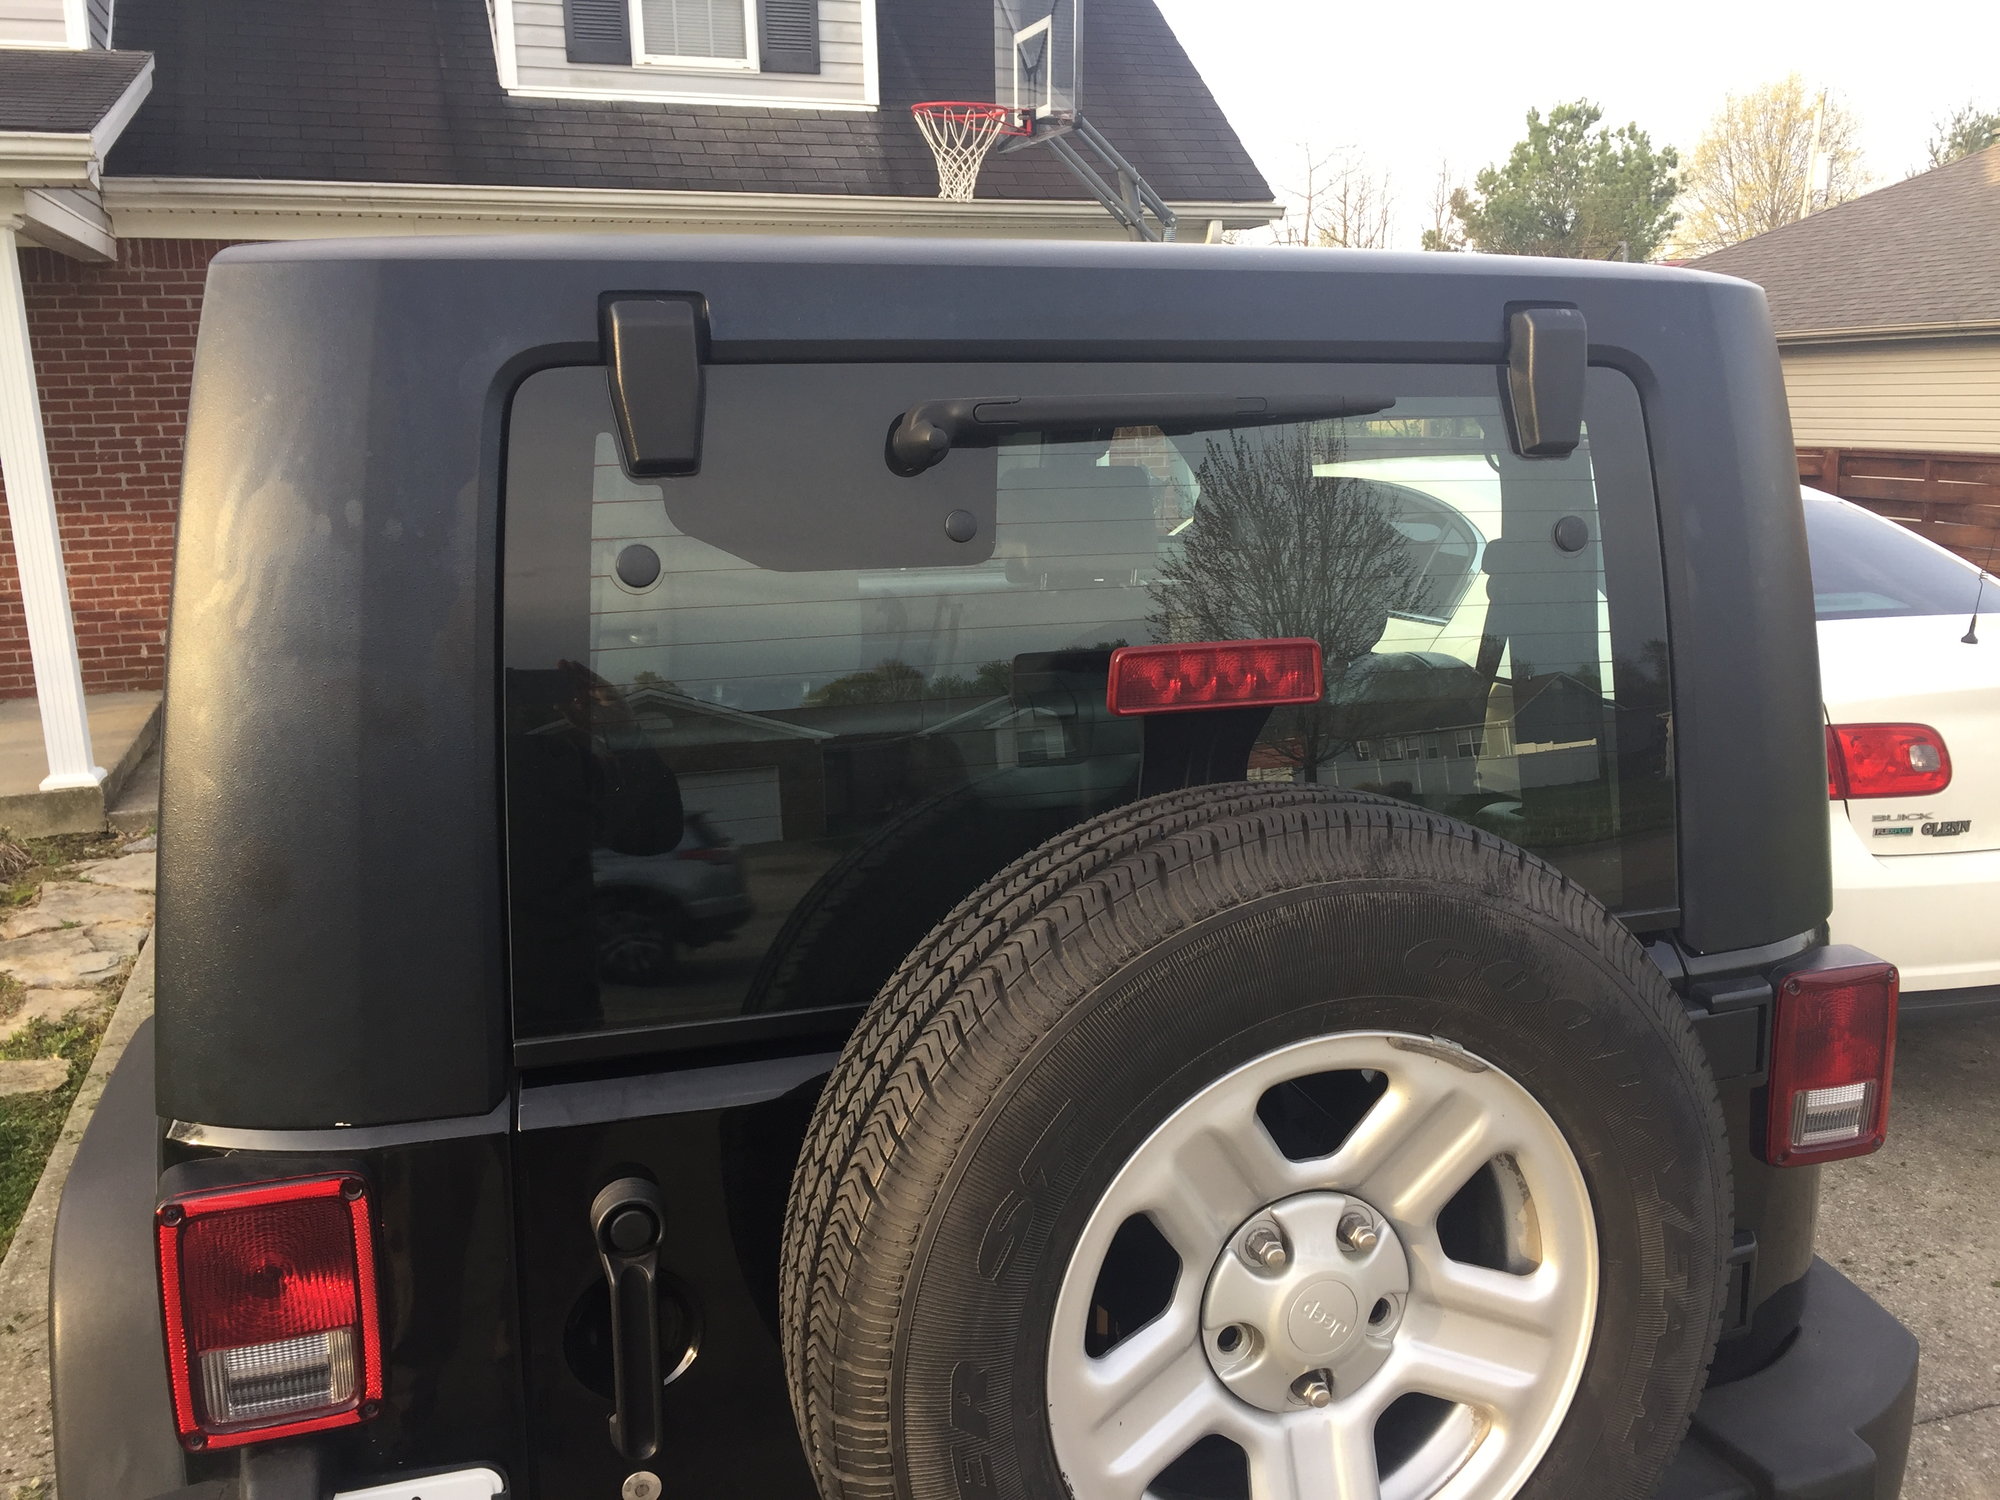 Exterior Body Parts - Hardtop (3 piece Freedom top) from a 2009 2 door JK - Used - 2007 to 2018 Jeep Wrangler - Lawrenceburg, KY 40342, United States